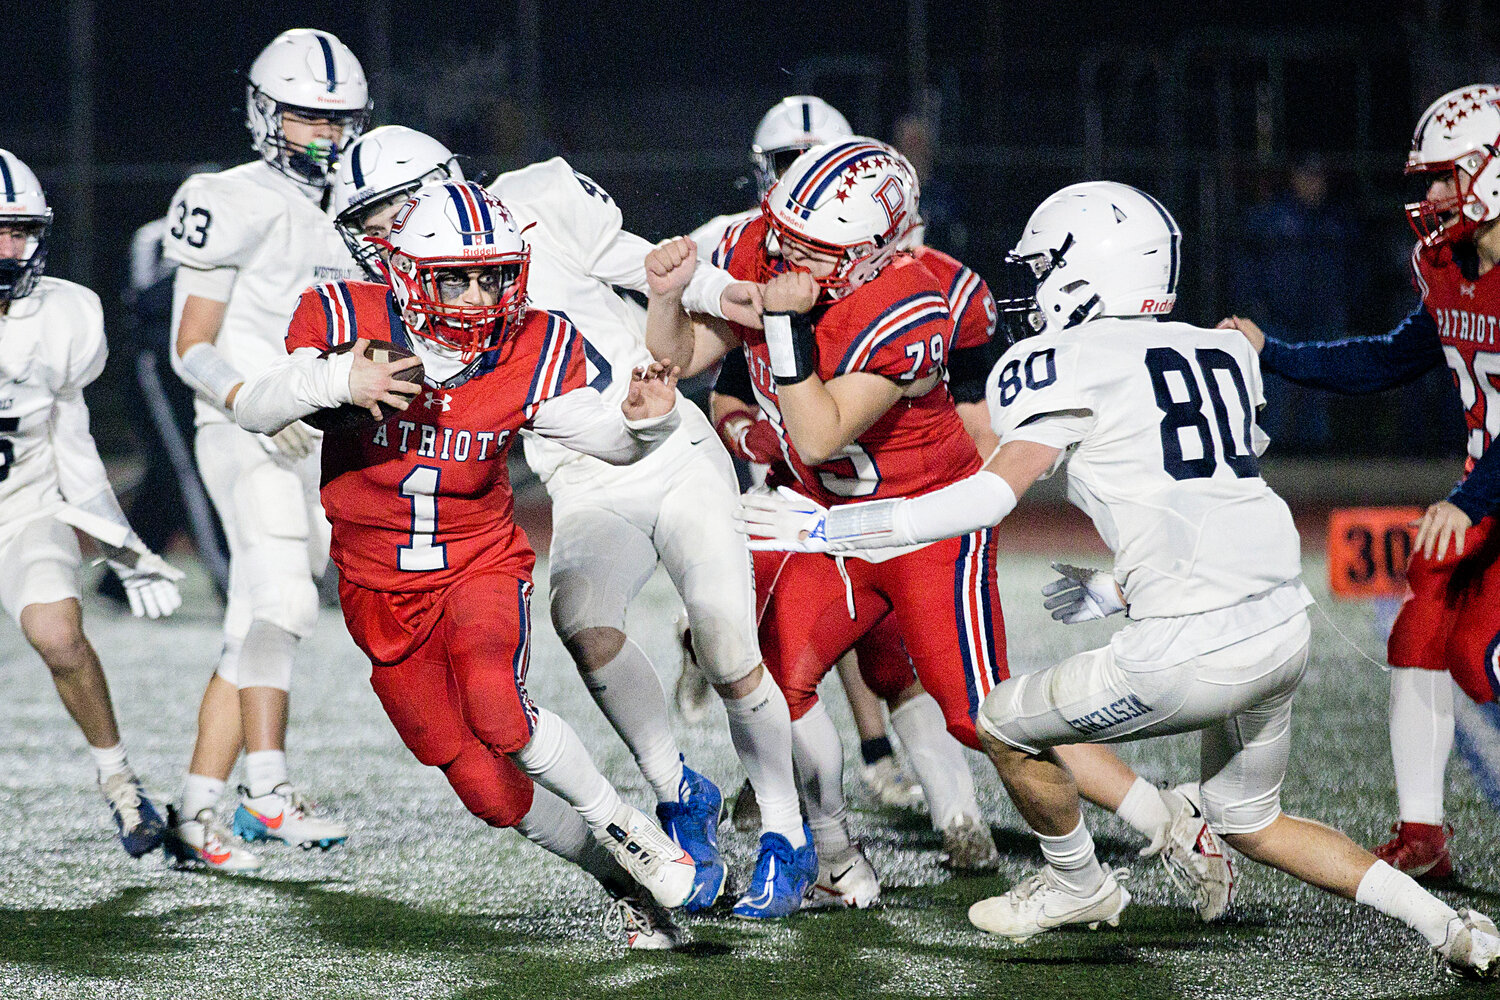 Aidan Maisen breaks free from the Westerly defense to gain yardage for the Patriots.